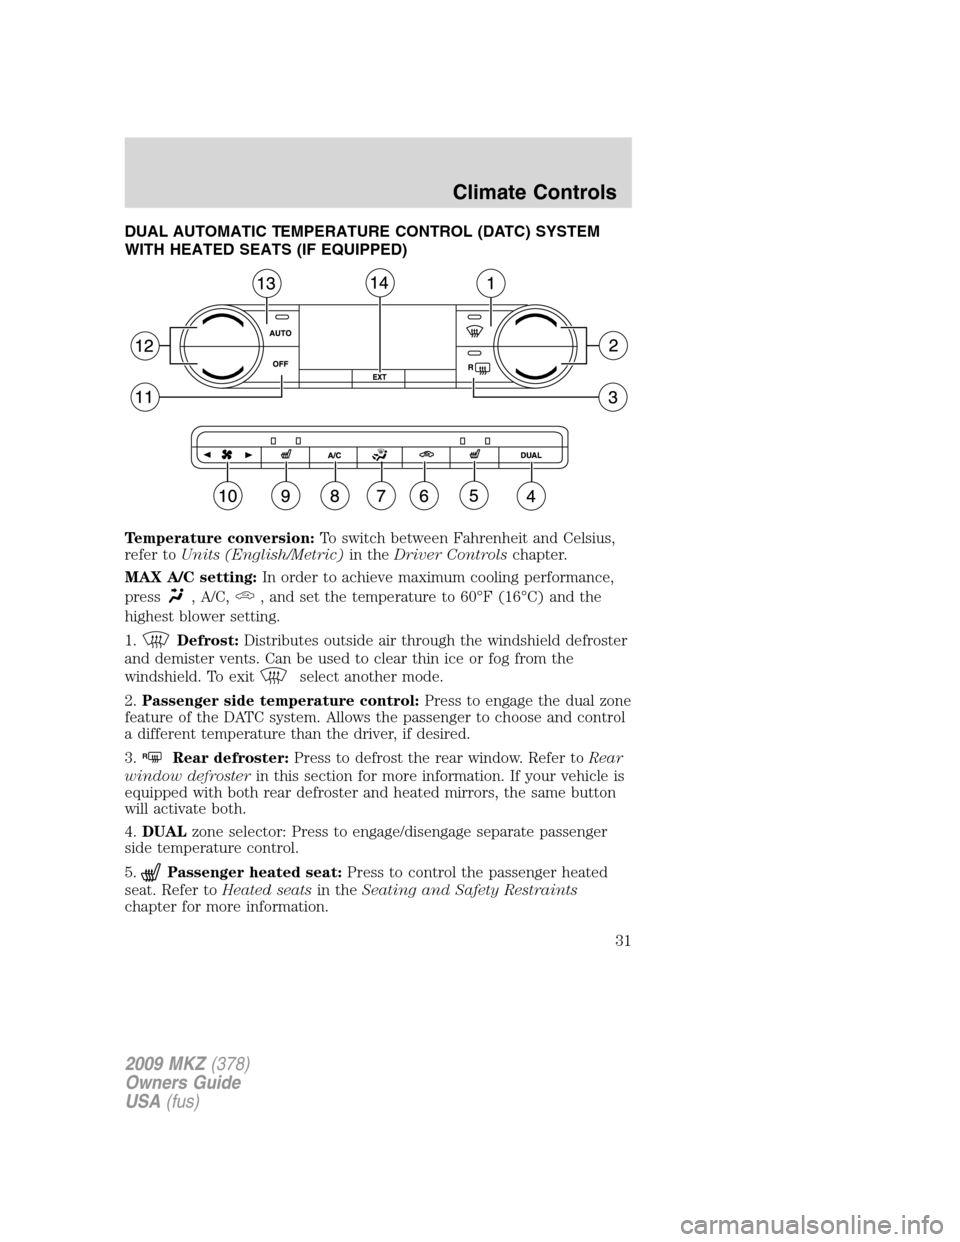 LINCOLN MKZ 2009  Owners Manual DUAL AUTOMATIC TEMPERATURE CONTROL (DATC) SYSTEM
WITH HEATED SEATS (IF EQUIPPED)
Temperature conversion:To switch between Fahrenheit and Celsius,
refer toUnits (English/Metric)in theDriver Controlscha